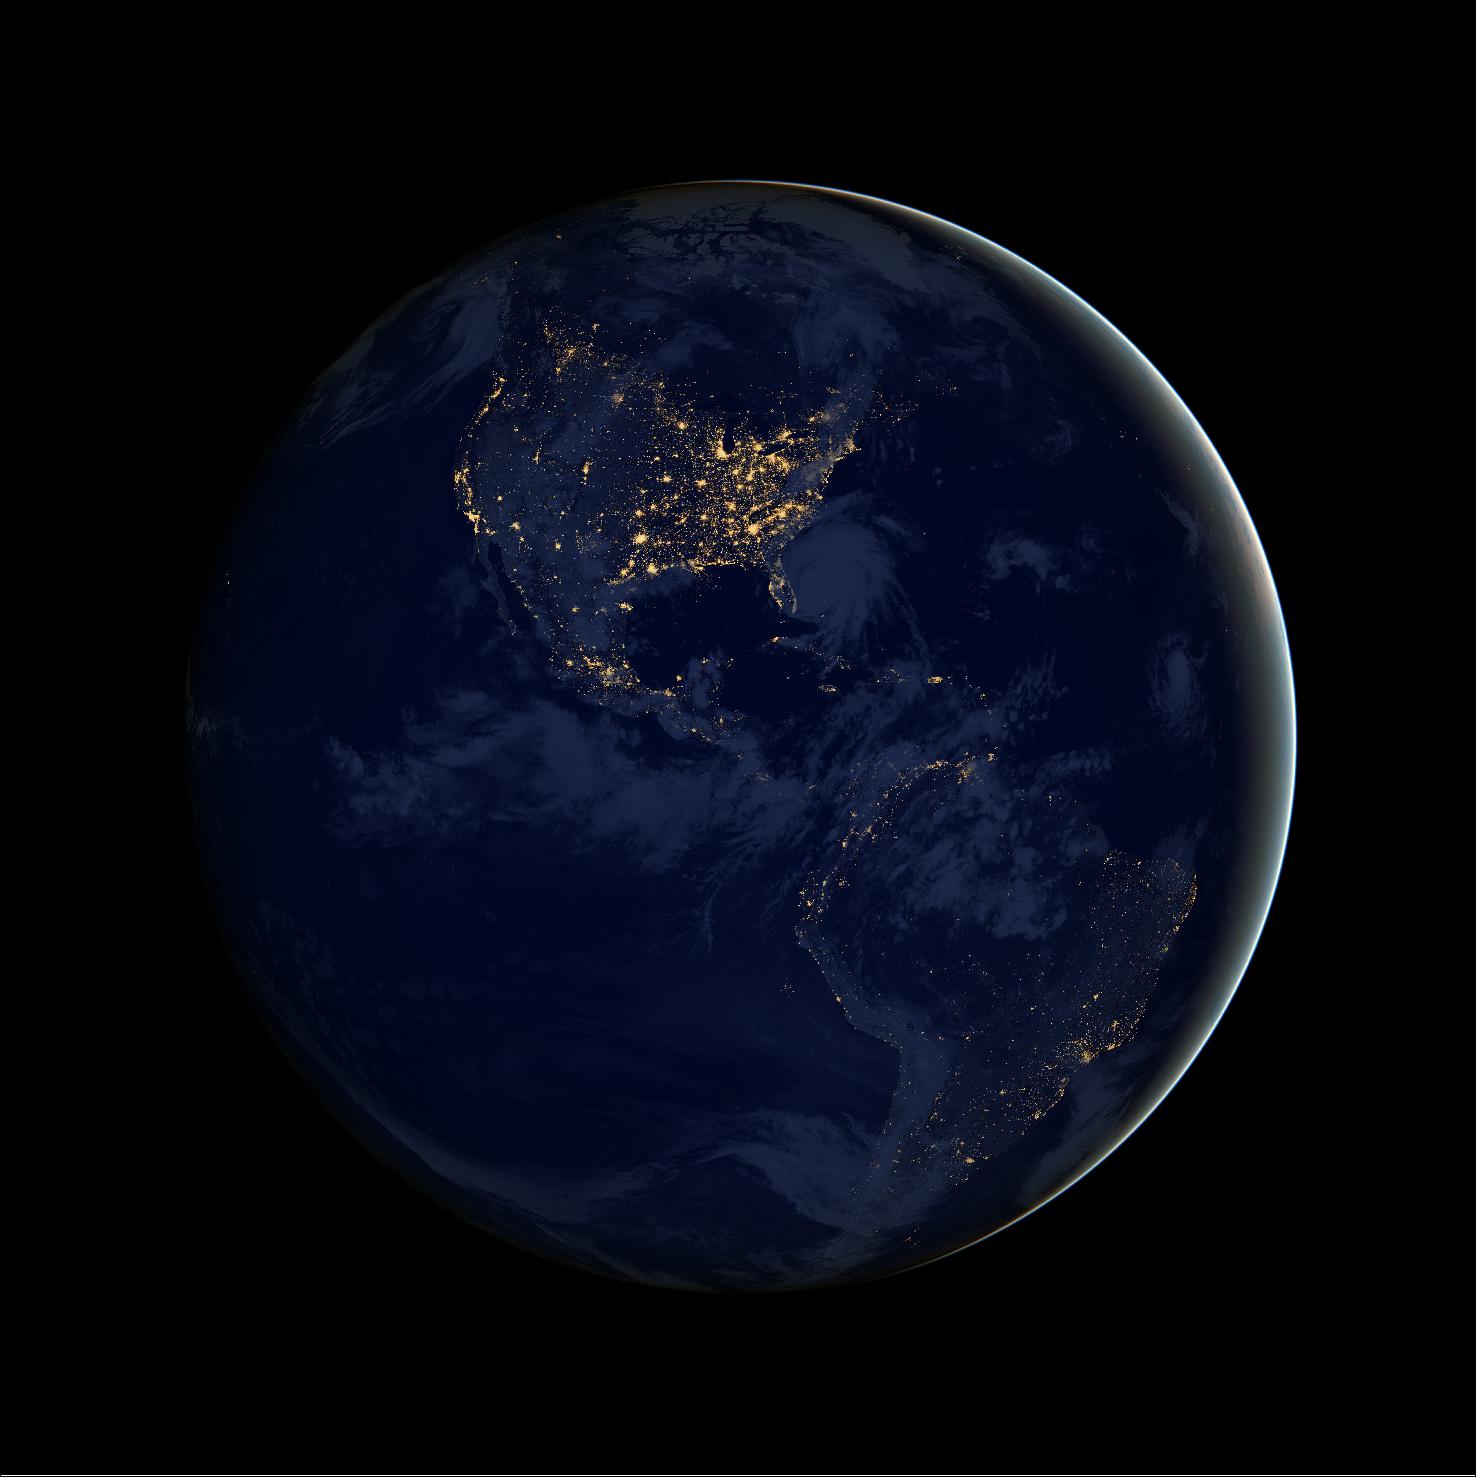 Figure 1: The state-of-the-art Earth science satellites launching in the near future will be generating unprecedented quantities of data on our planet’s vital signs. Cloud computing will help researchers make the most of those troves of information (image credit: NASA Earth Observatory)